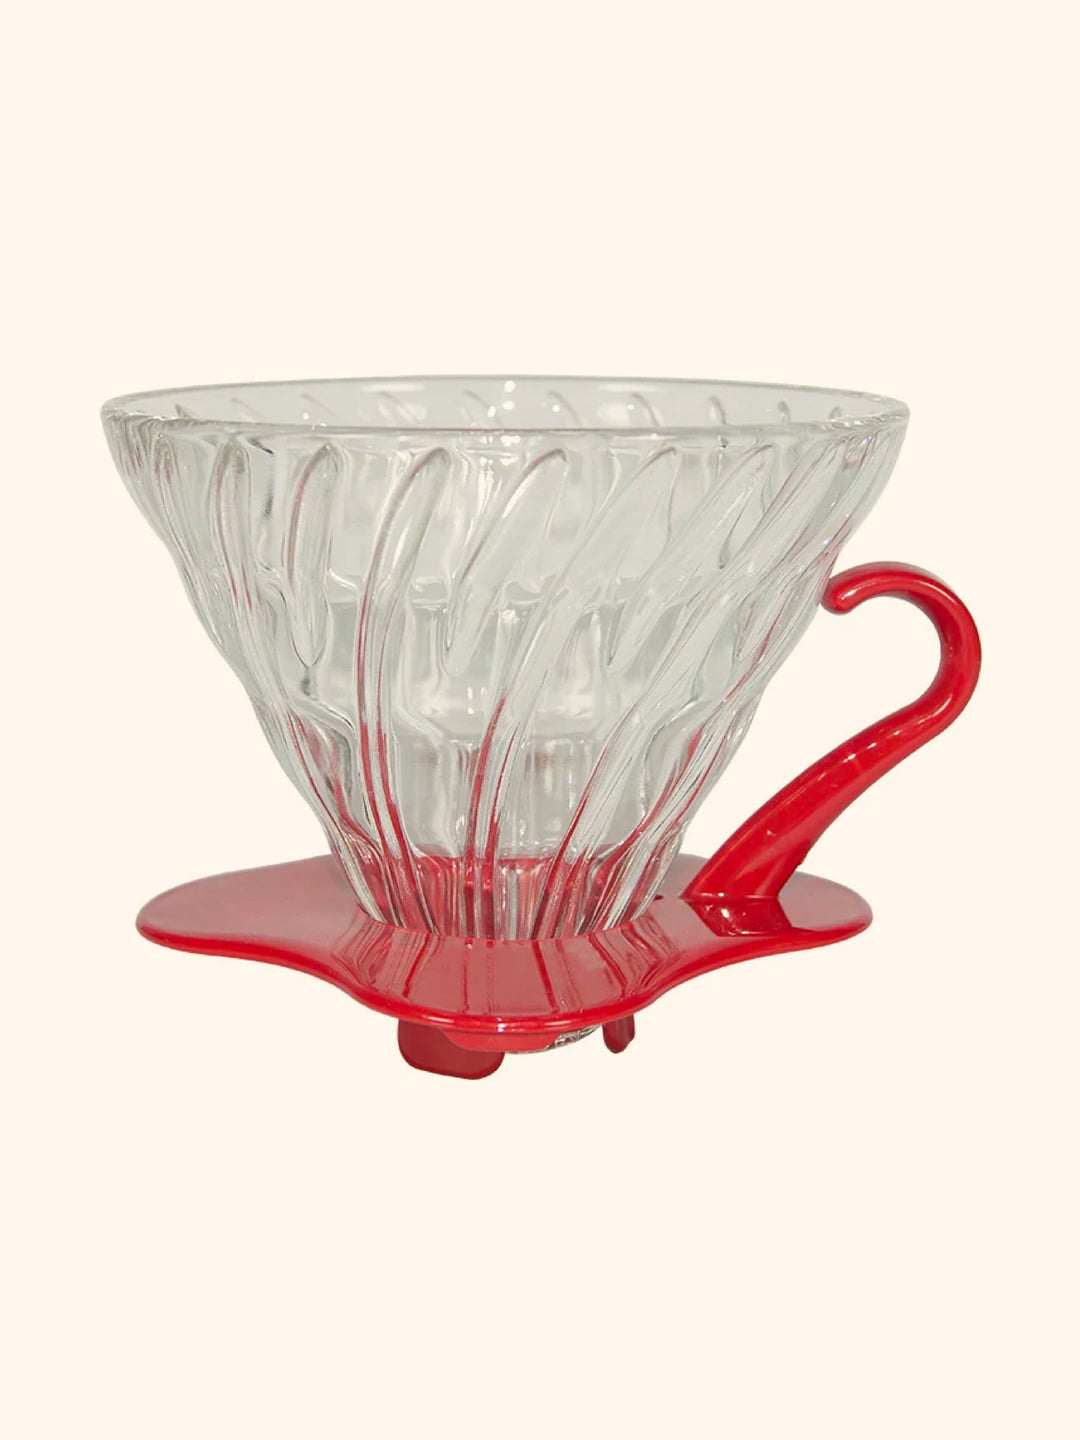 The world-renowned V60 dripper